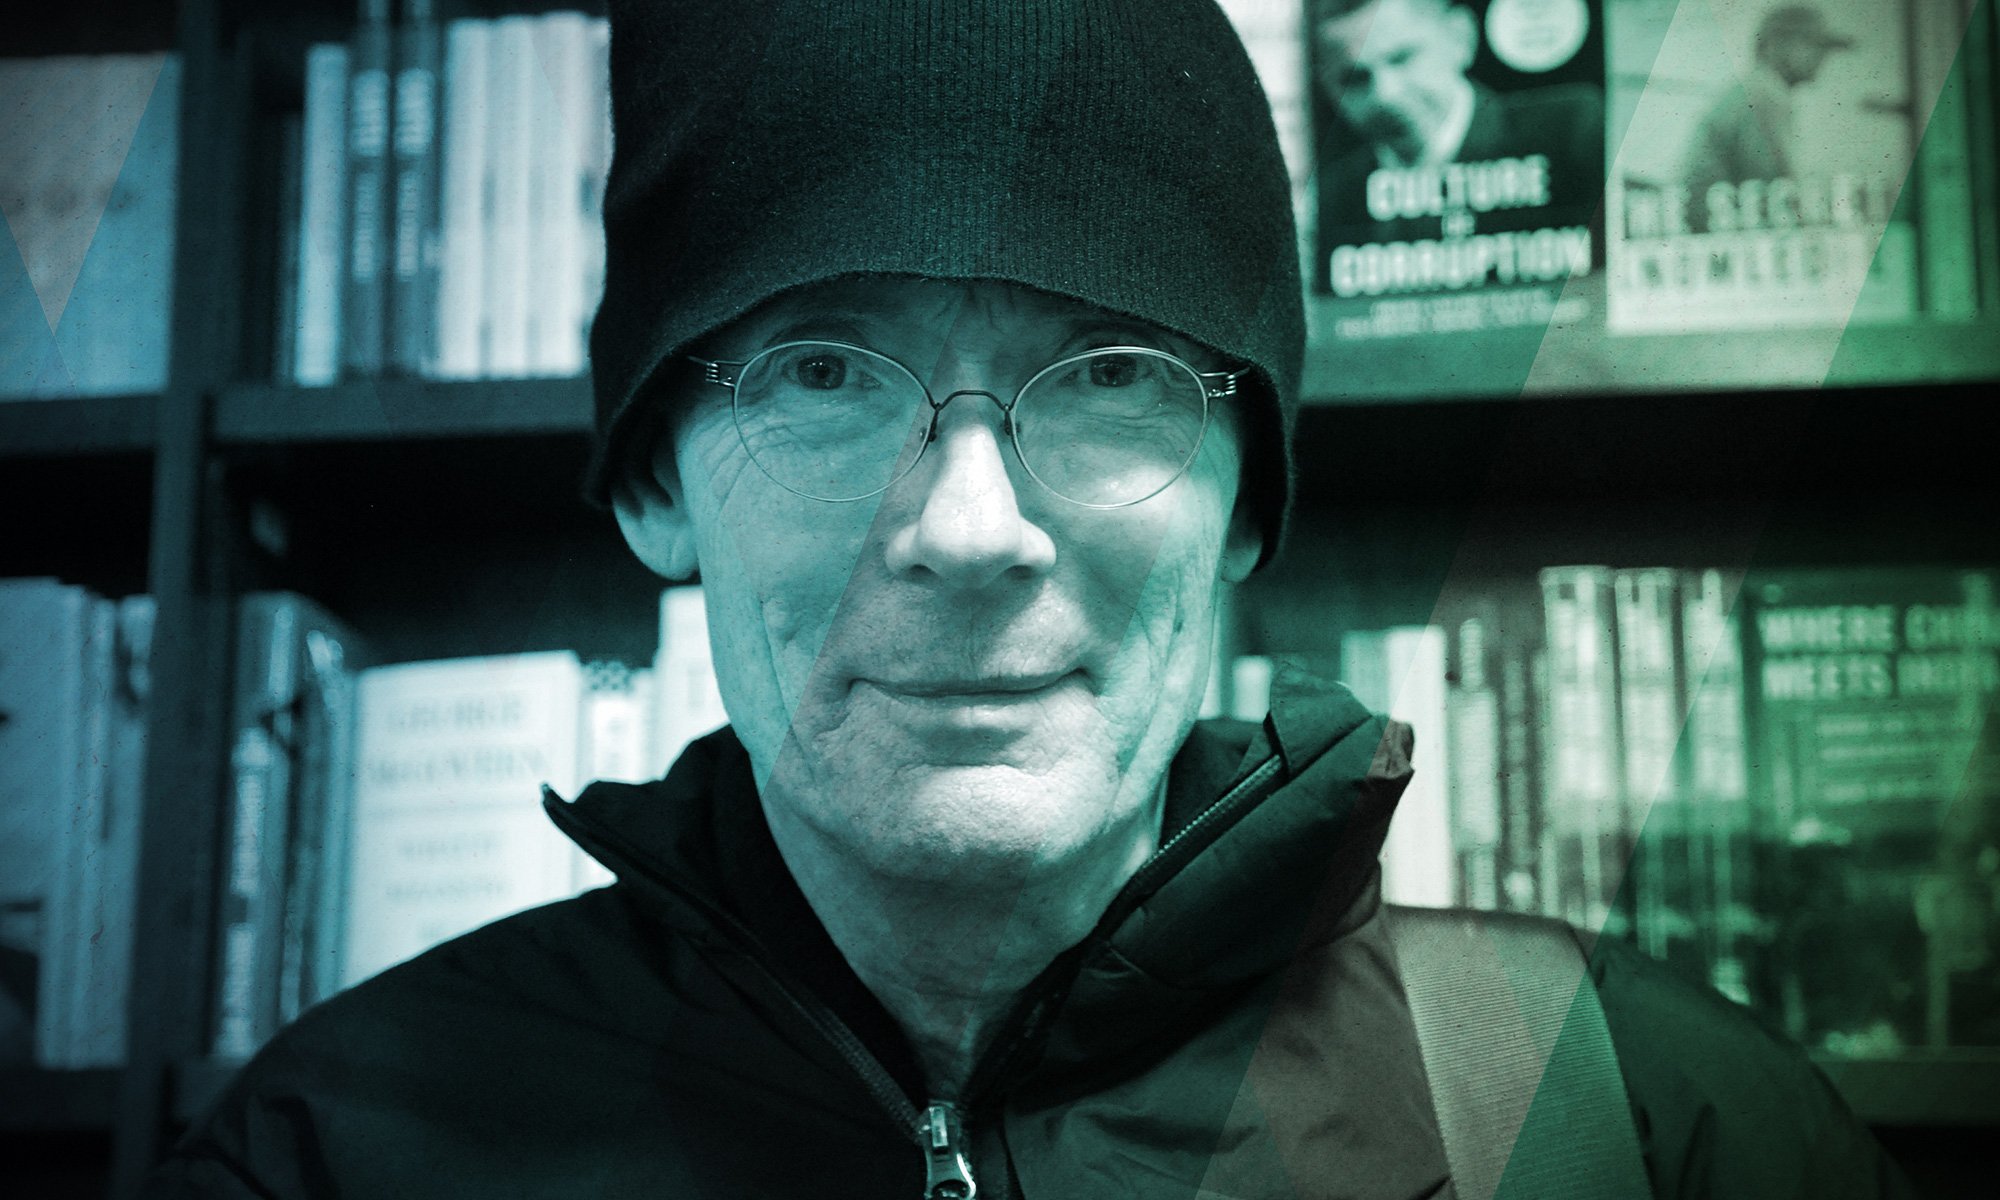 William Gibson riffs on writing and the future